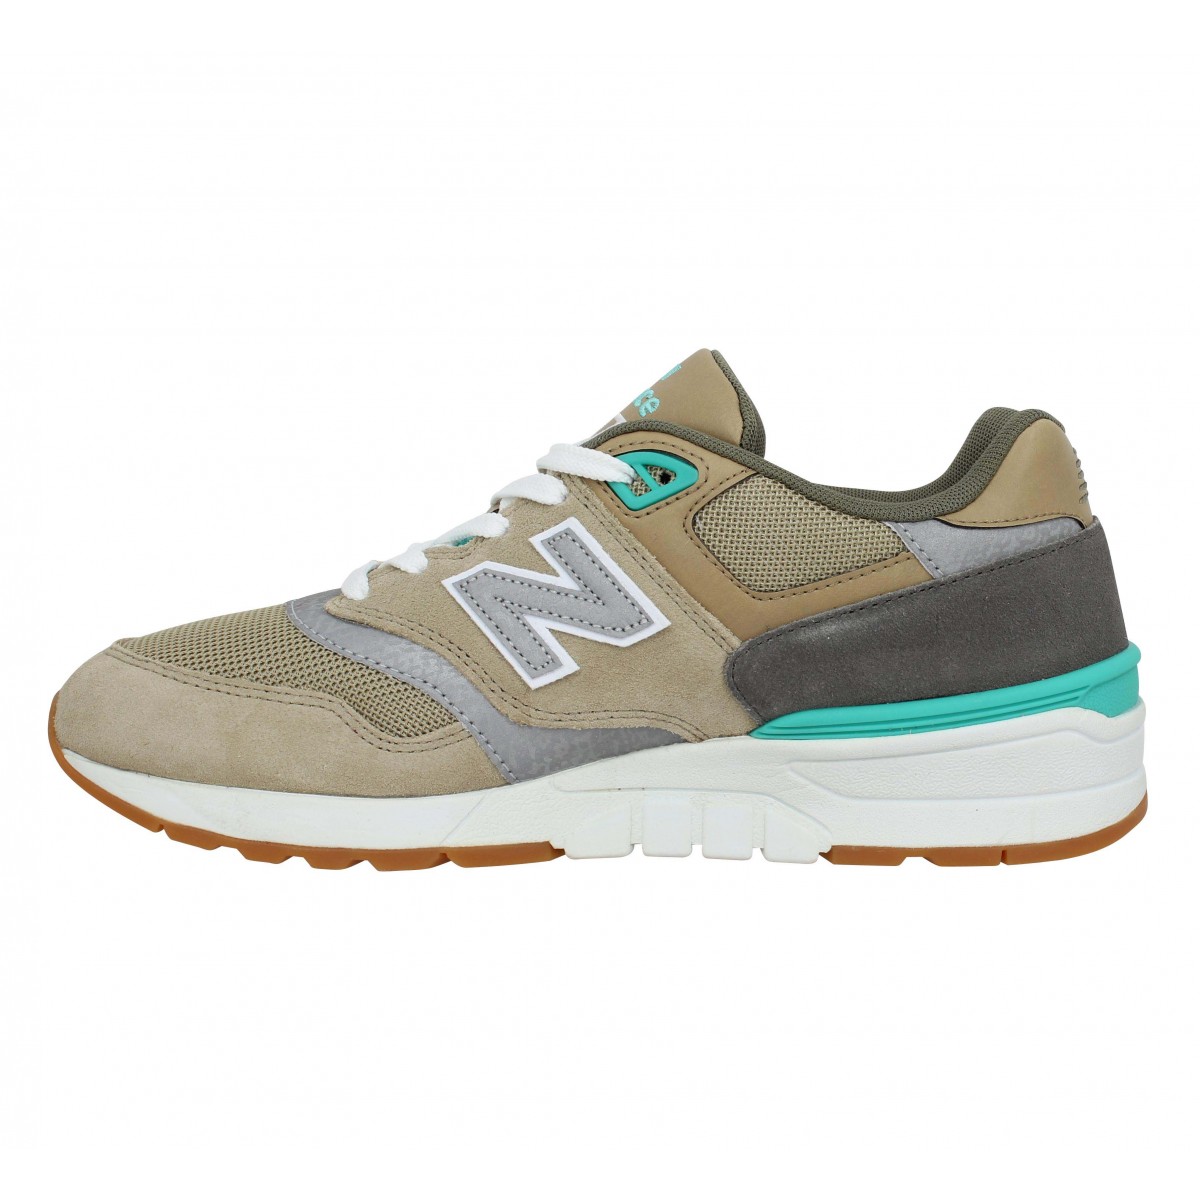 New balance 597 velours homme olive homme | Fanny chaussures